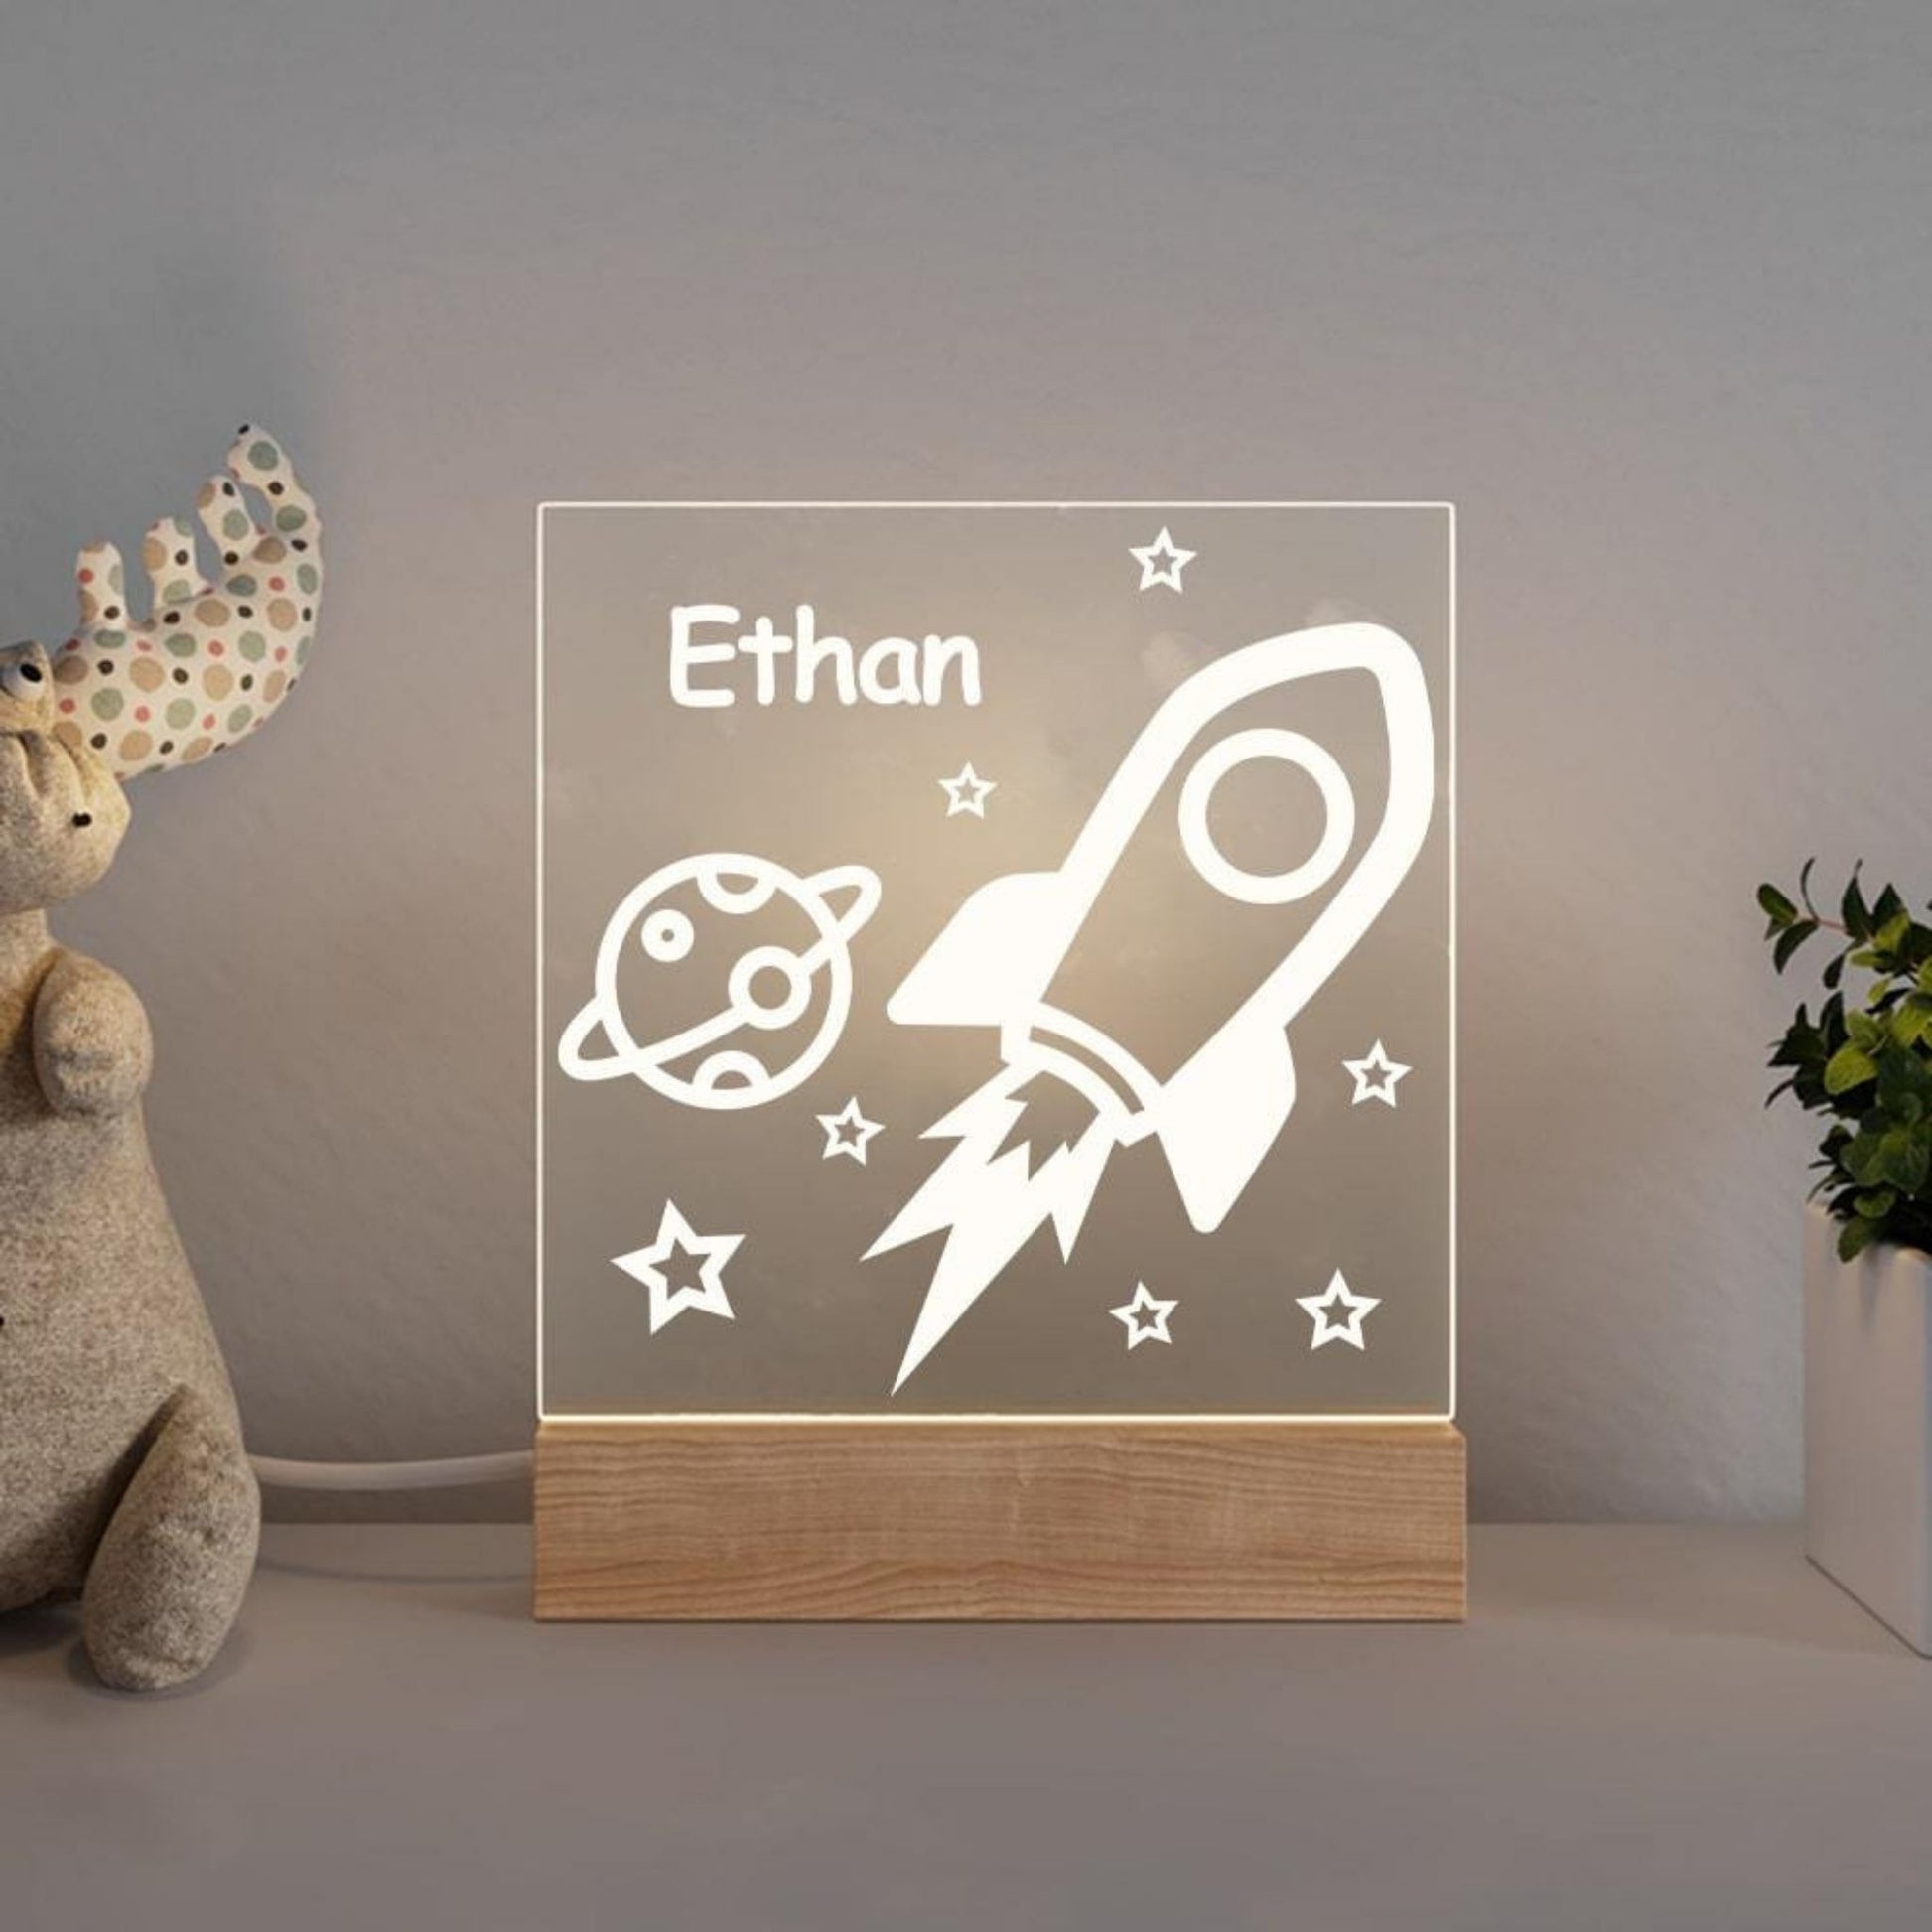 Personalized night light with name for kids nursery | Rocketship night light with name | Hunny Bubba Kids